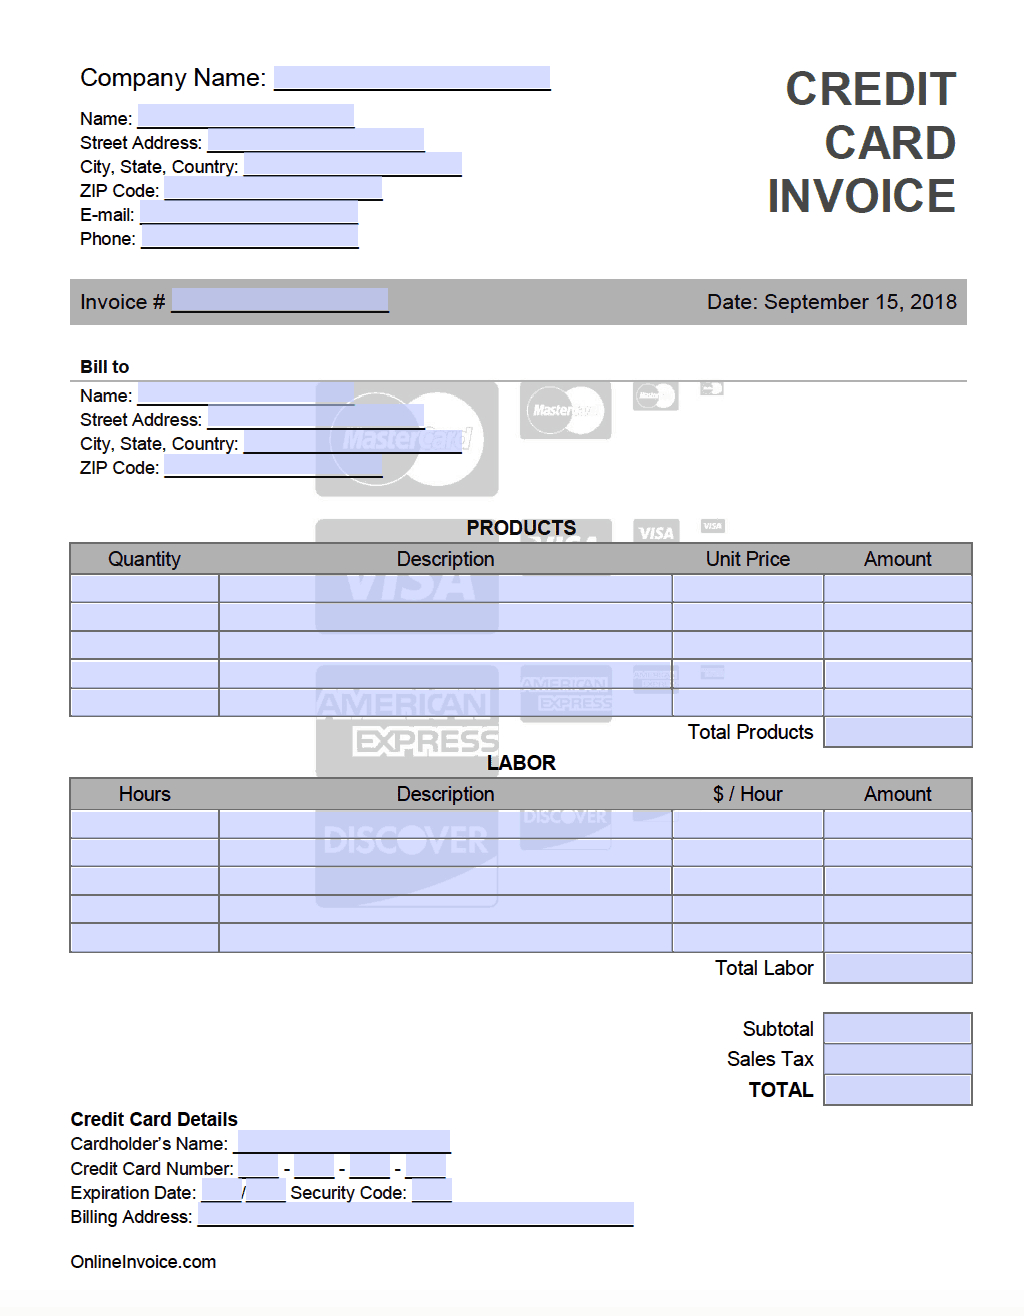 Credit Card Invoice Template - Onlineinvoice With Regard To Credit Card Receipt Template